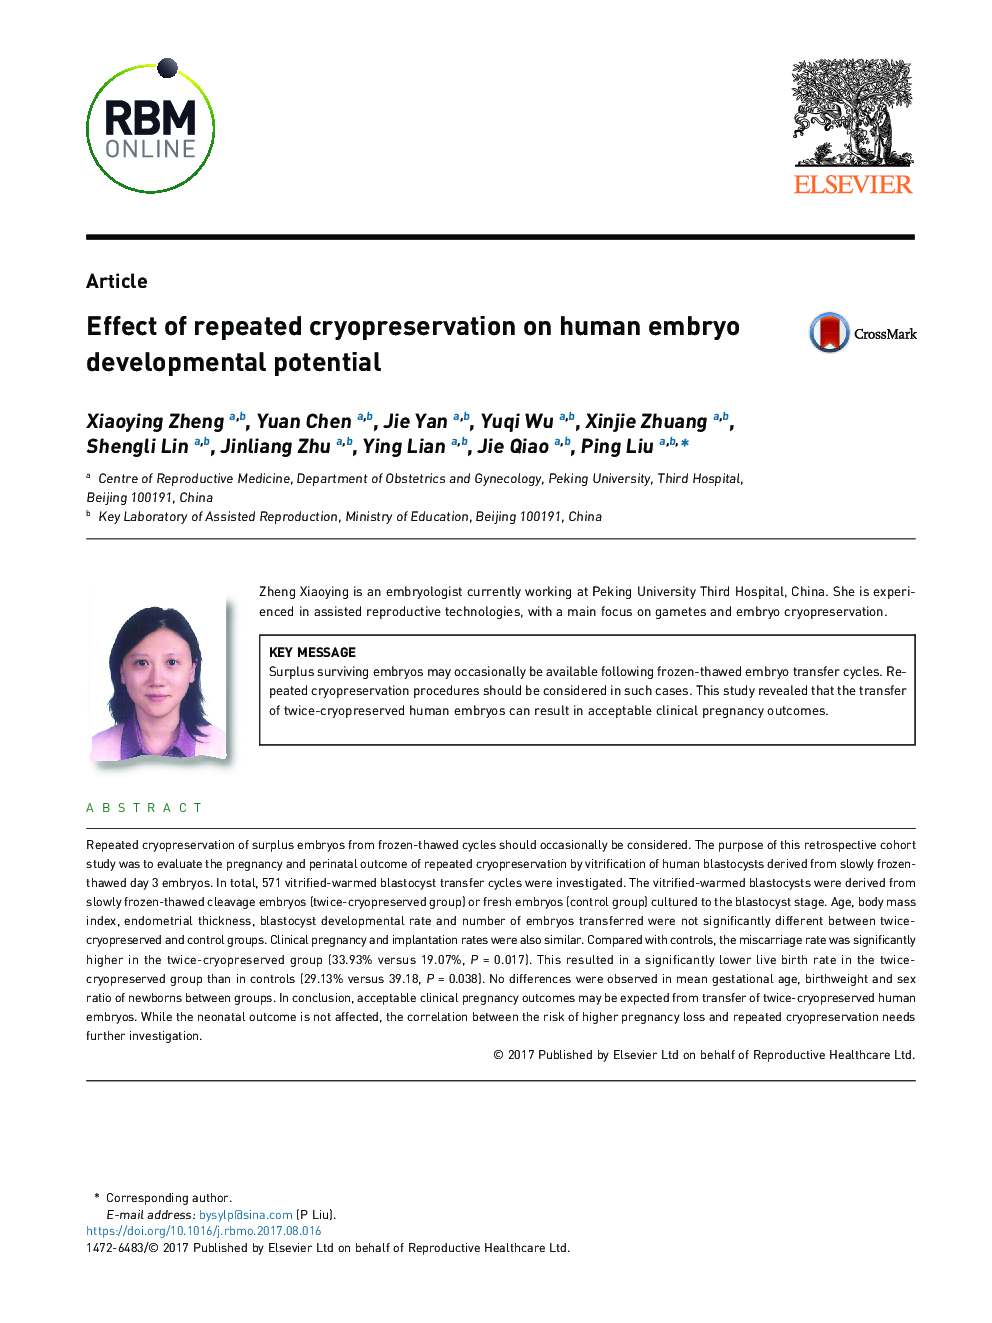 Effect of repeated cryopreservation on human embryo developmental potential